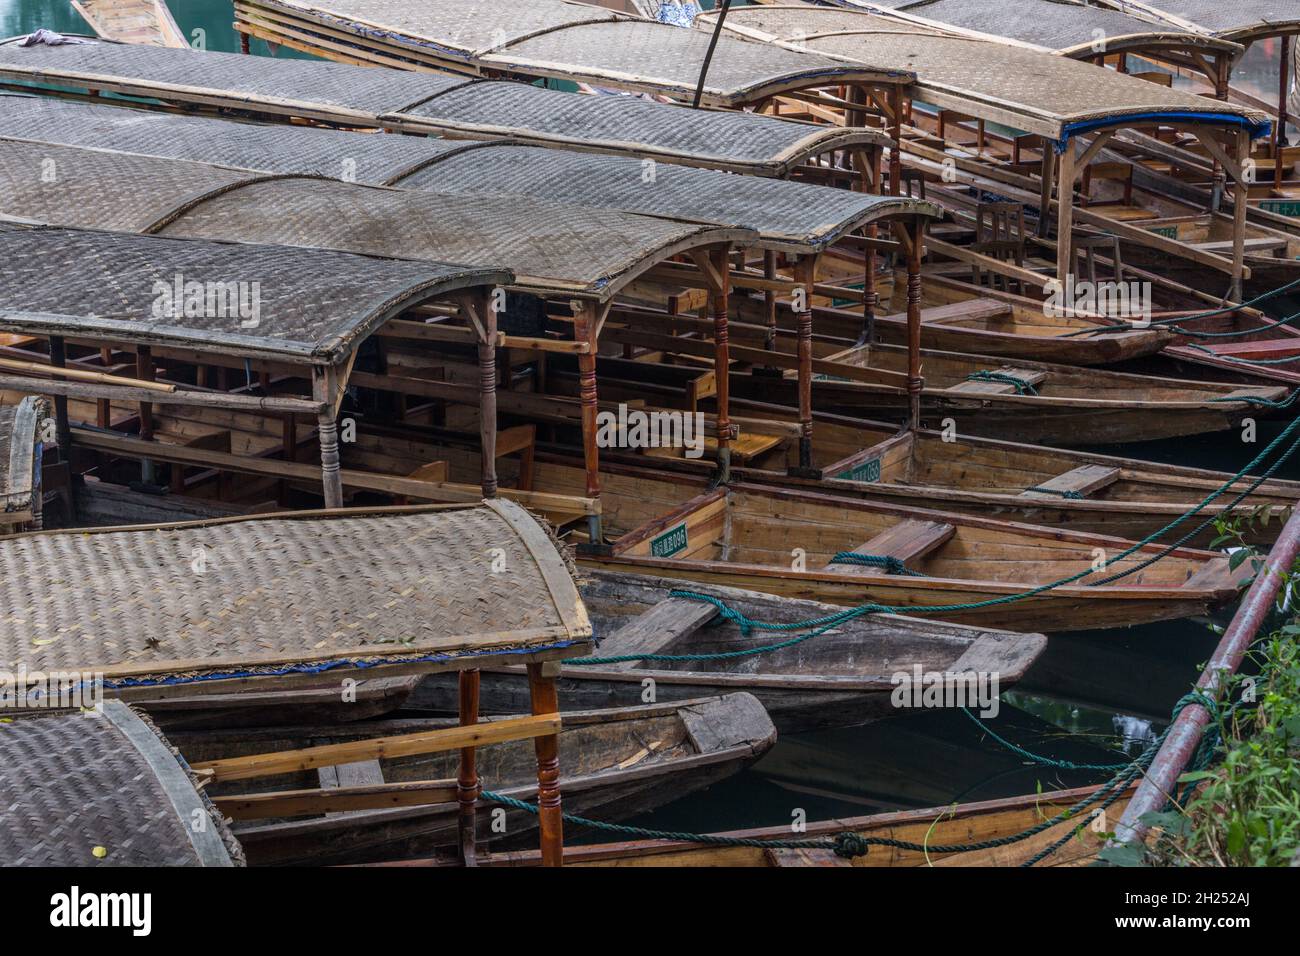 A cluster of covered tour boats tied up on the bank of the Tuojiang River in Fenghuang, China. Stock Photo